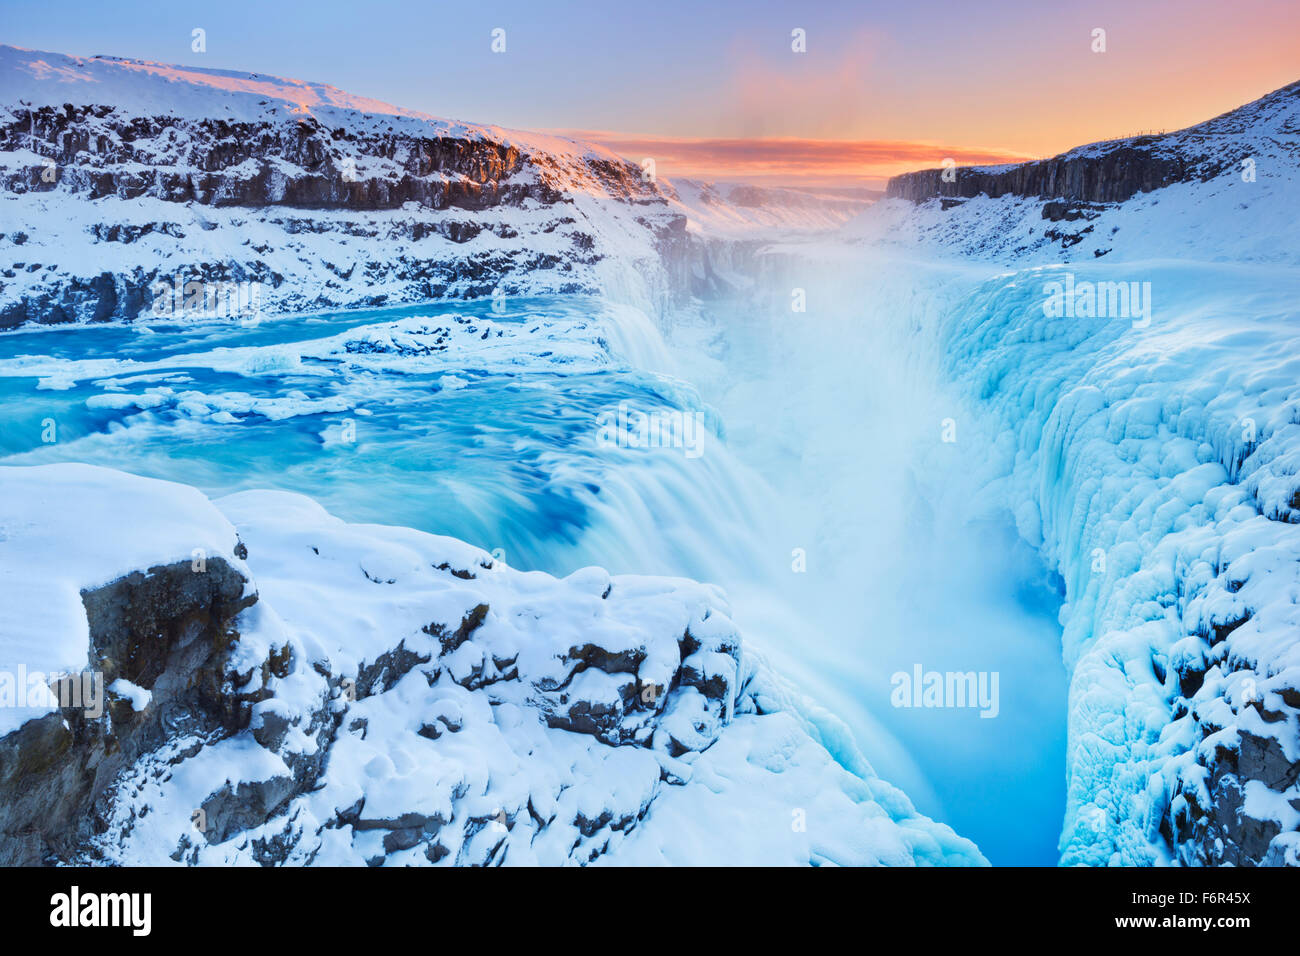 The Gullfoss Falls in Iceland in winter when the falls are partially frozen. Photographed at sunset. Stock Photo